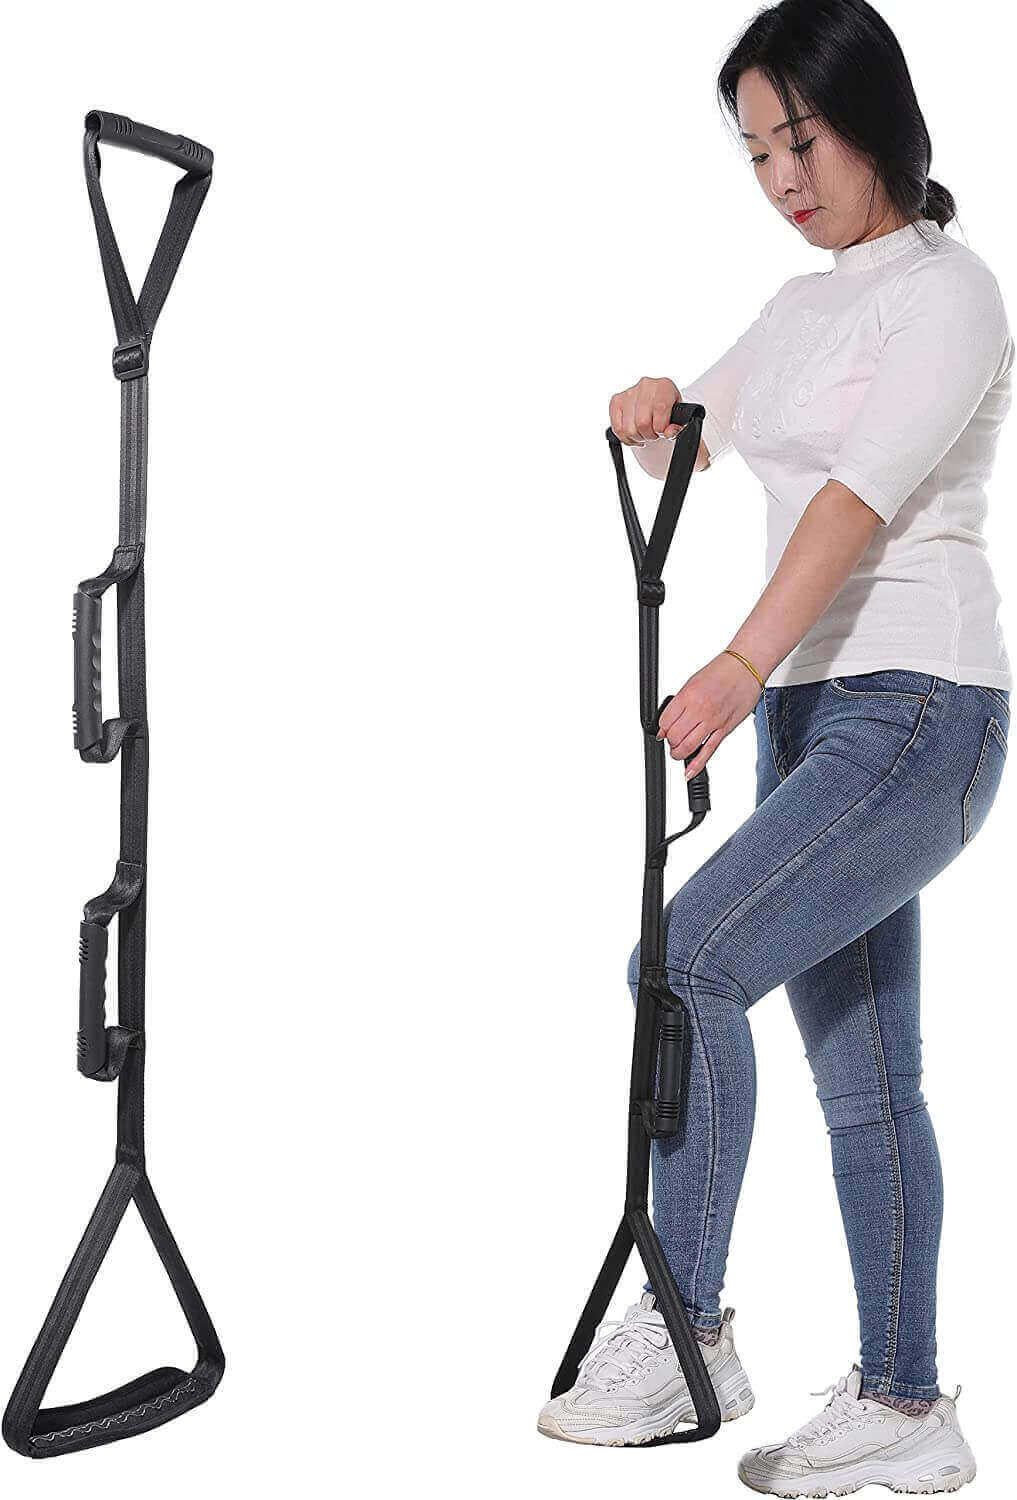 Fanwer Leg Lifter Strap for Transfer Aids in Bed, Car, or Wheelchair